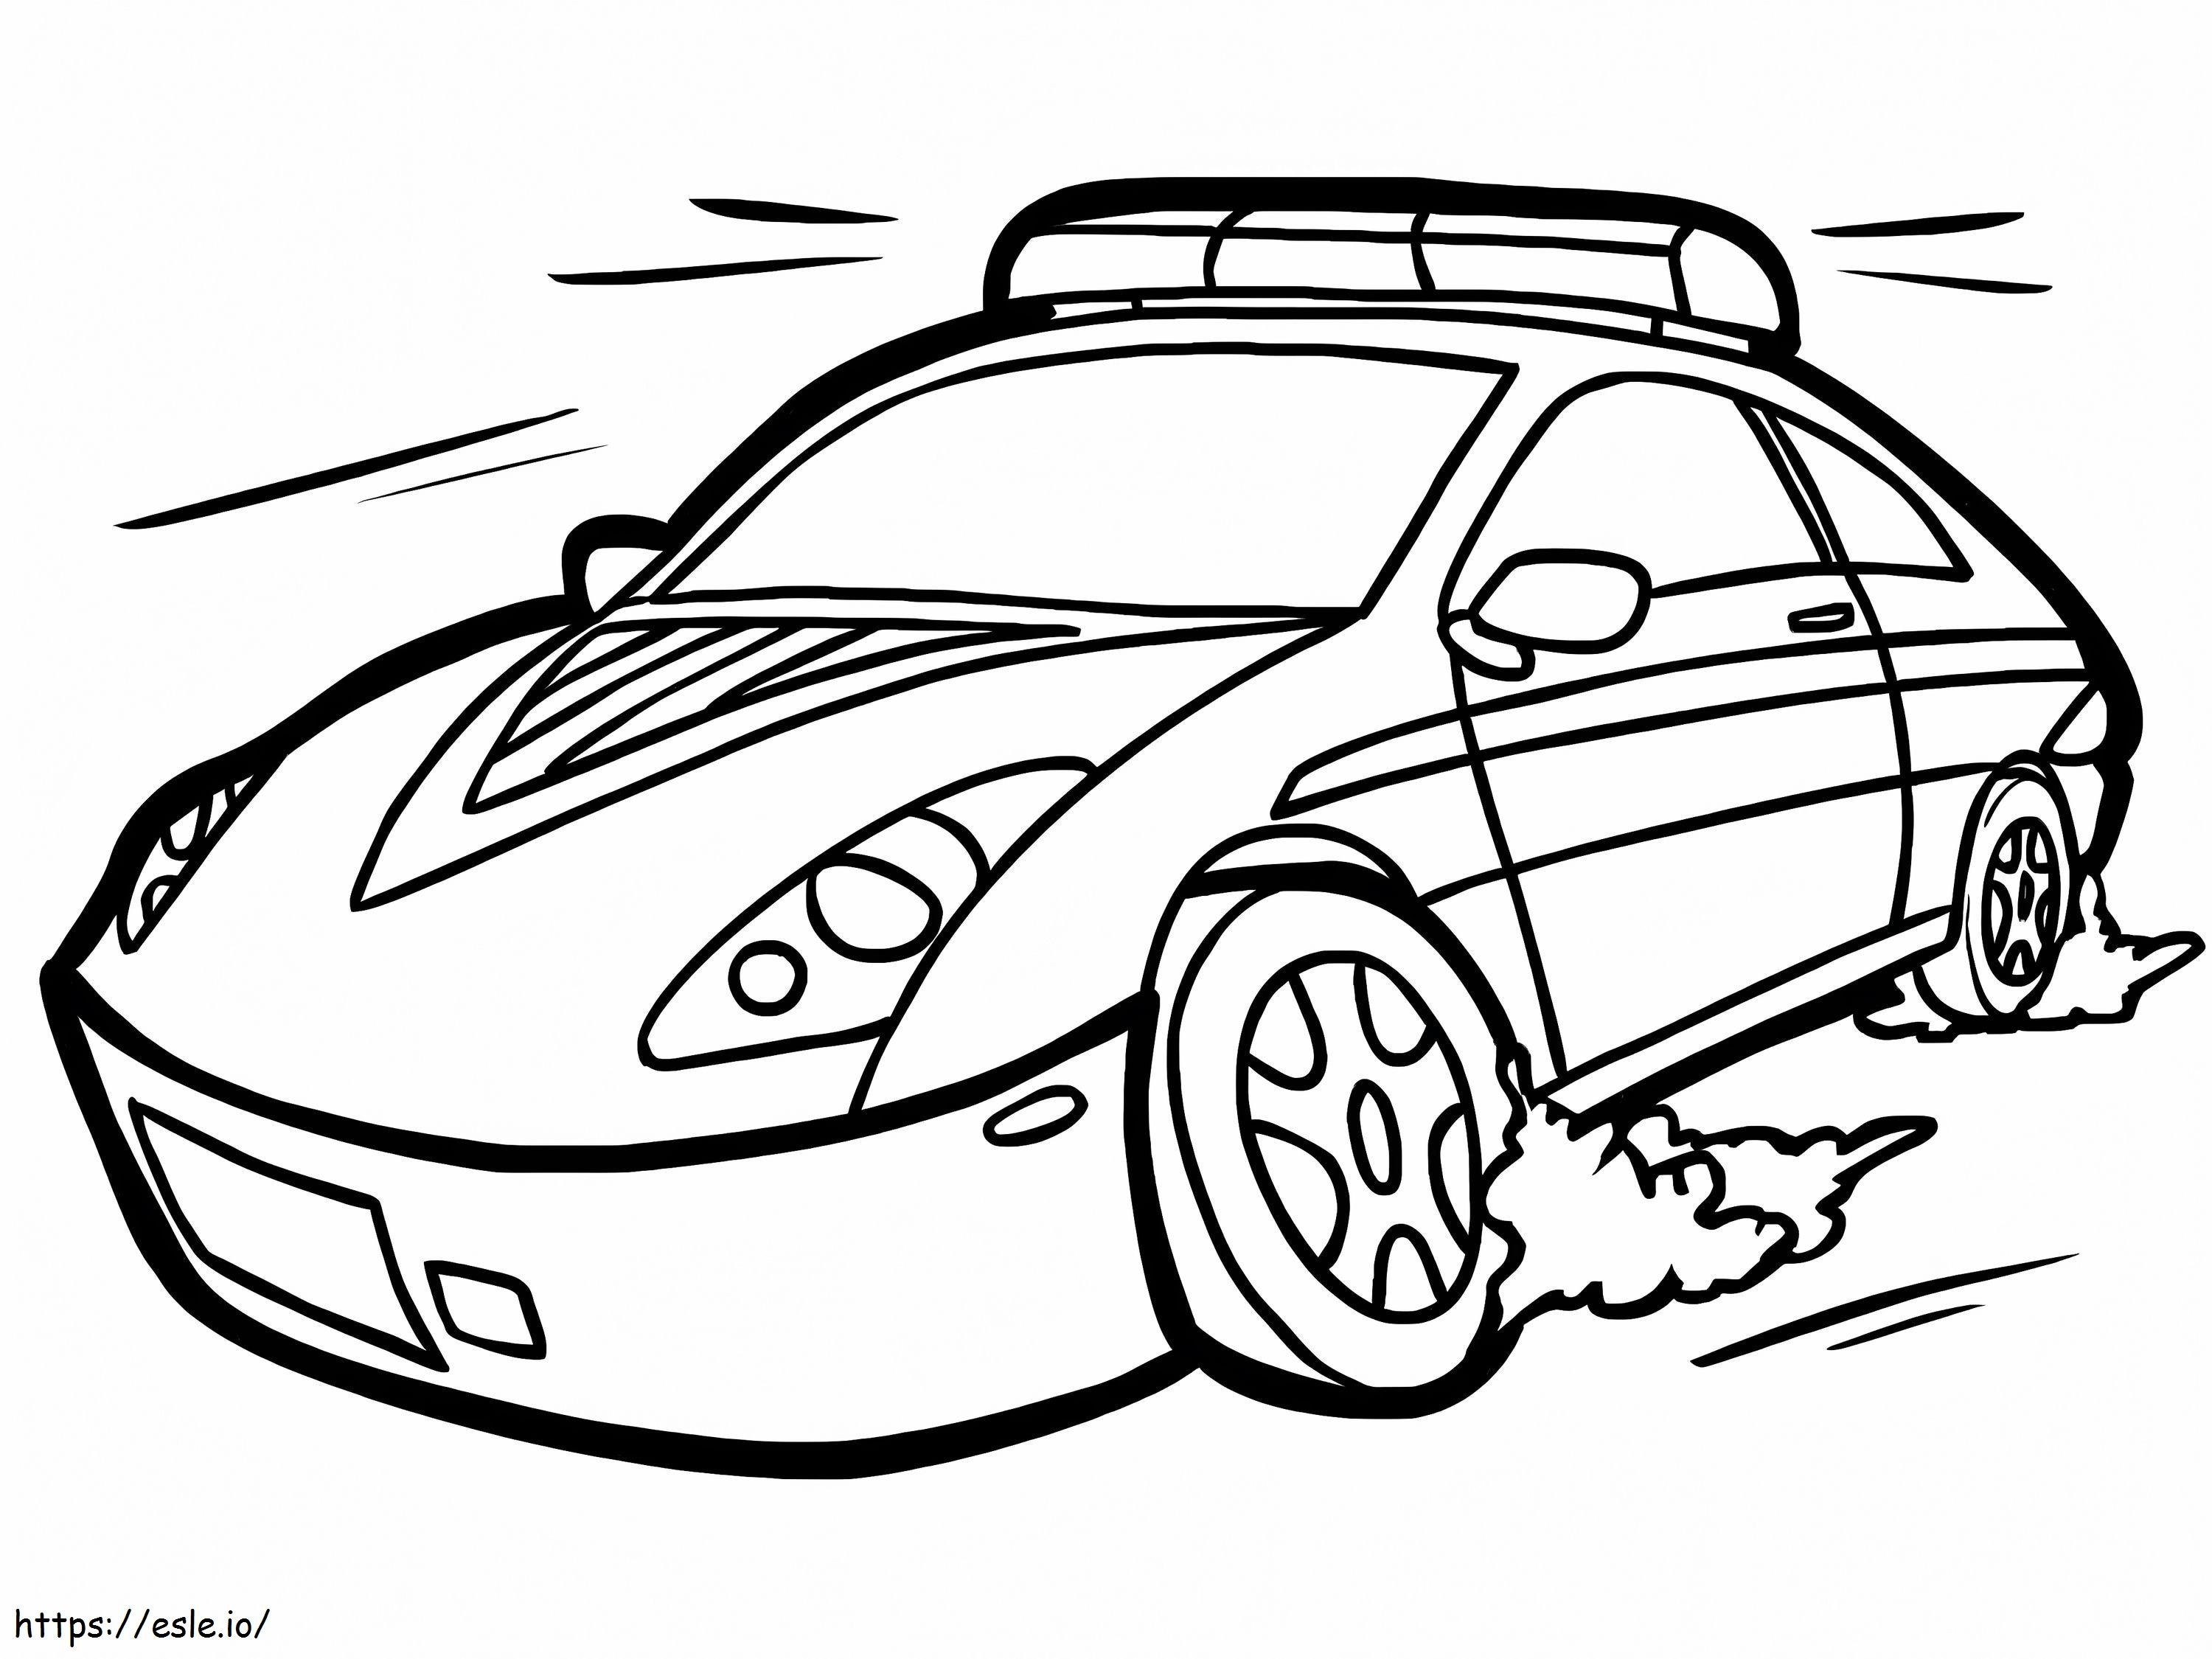 Driving Police Car coloring page